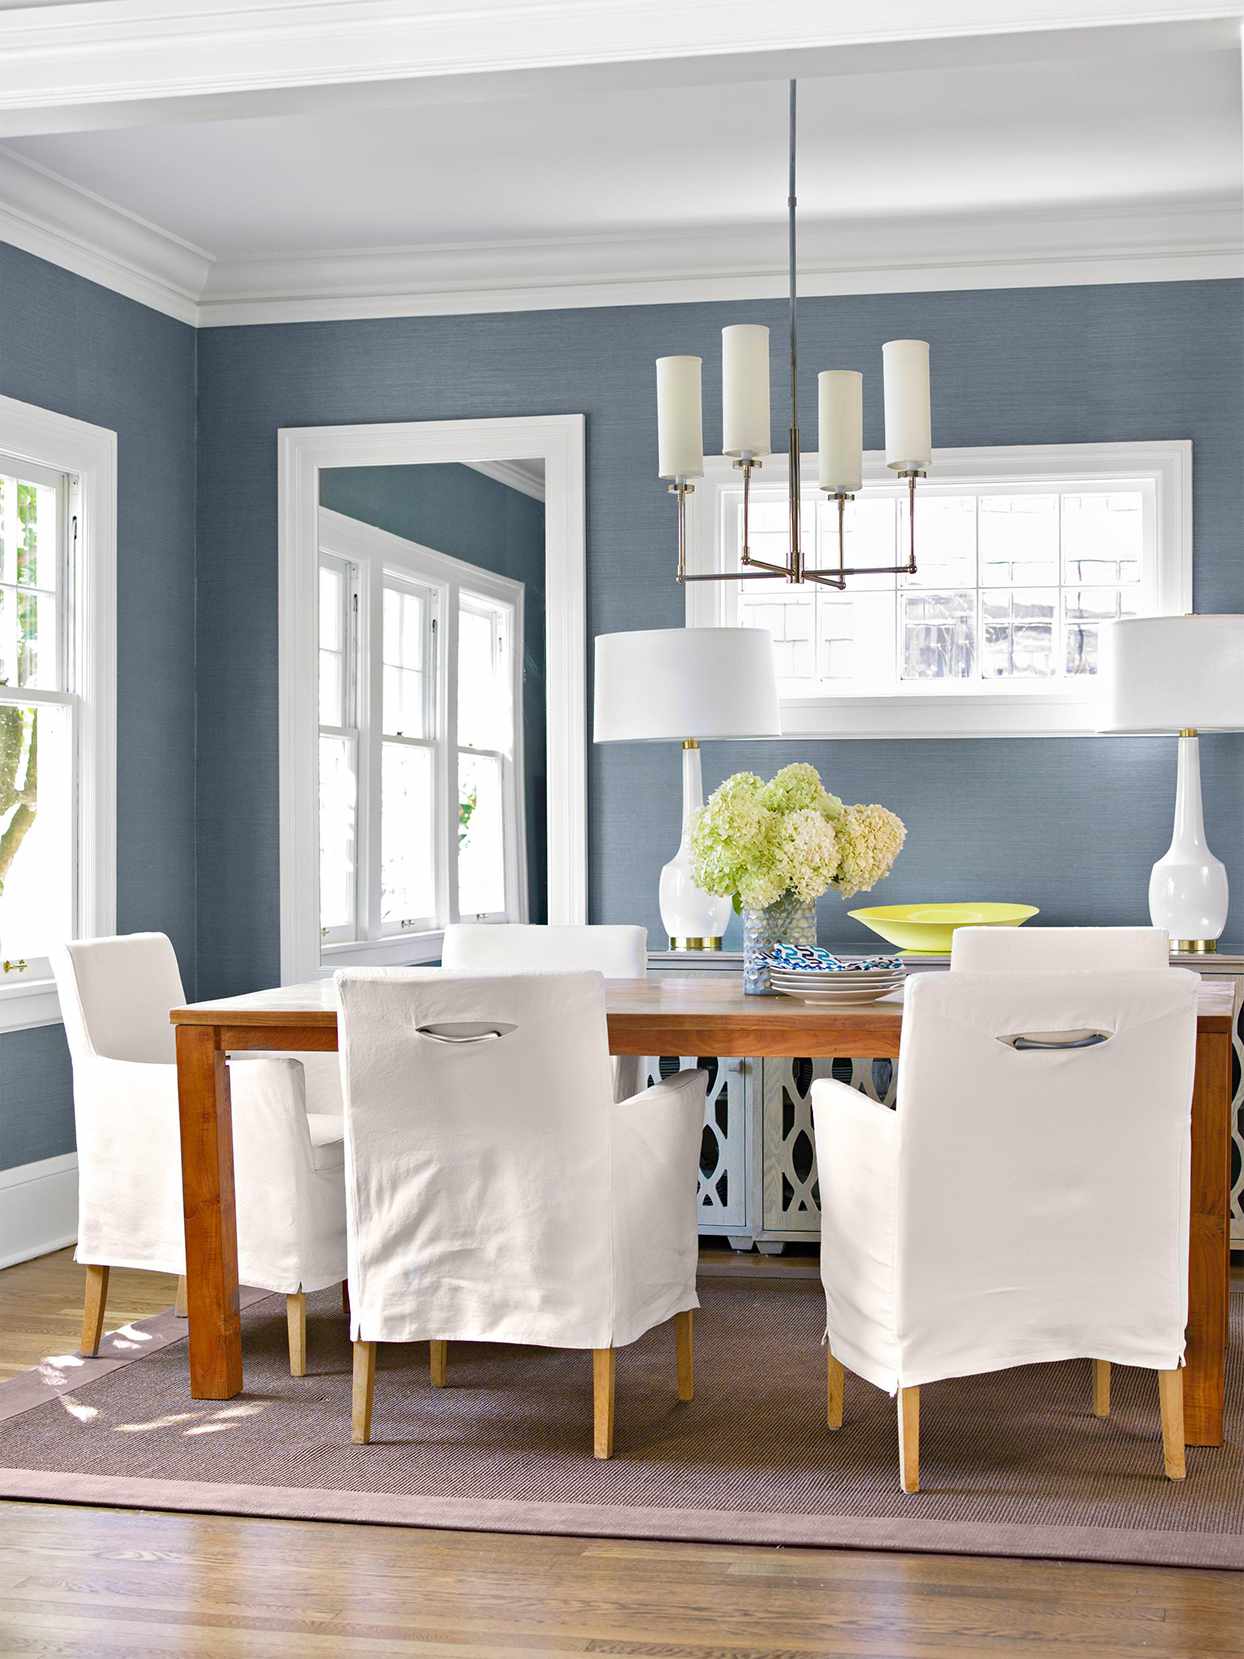 How To Install A Light Fixture For, How To Raise Dining Room Light Fixture